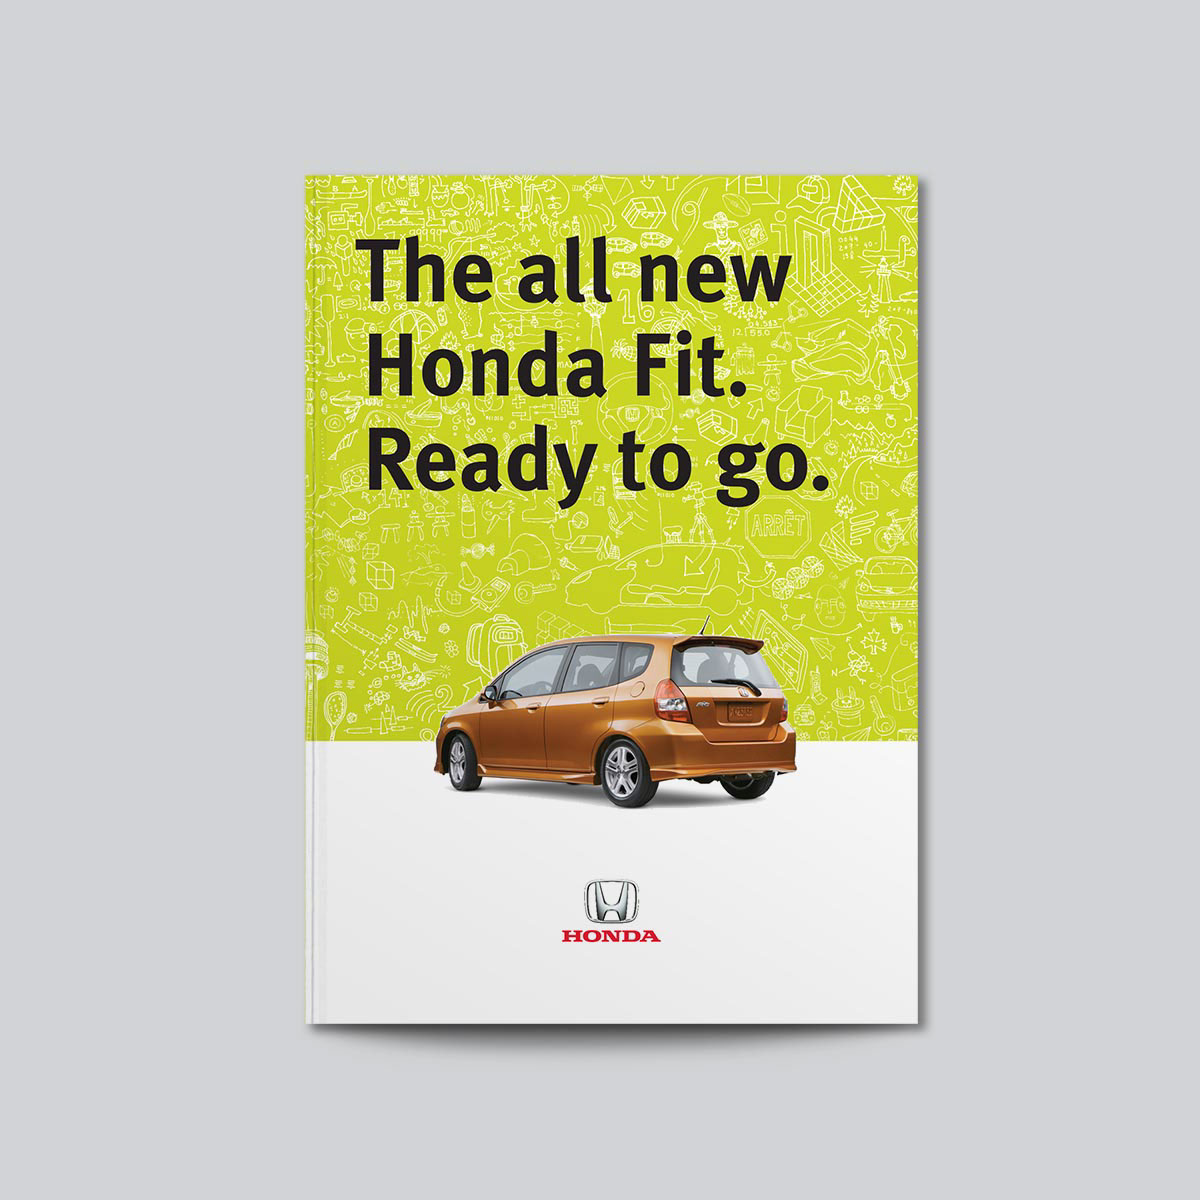  Honda Fit Campaign with Grip Limited. Creative Direction by Barry Quinn, Alan Madill. Design Direction by Mark Buchner. 